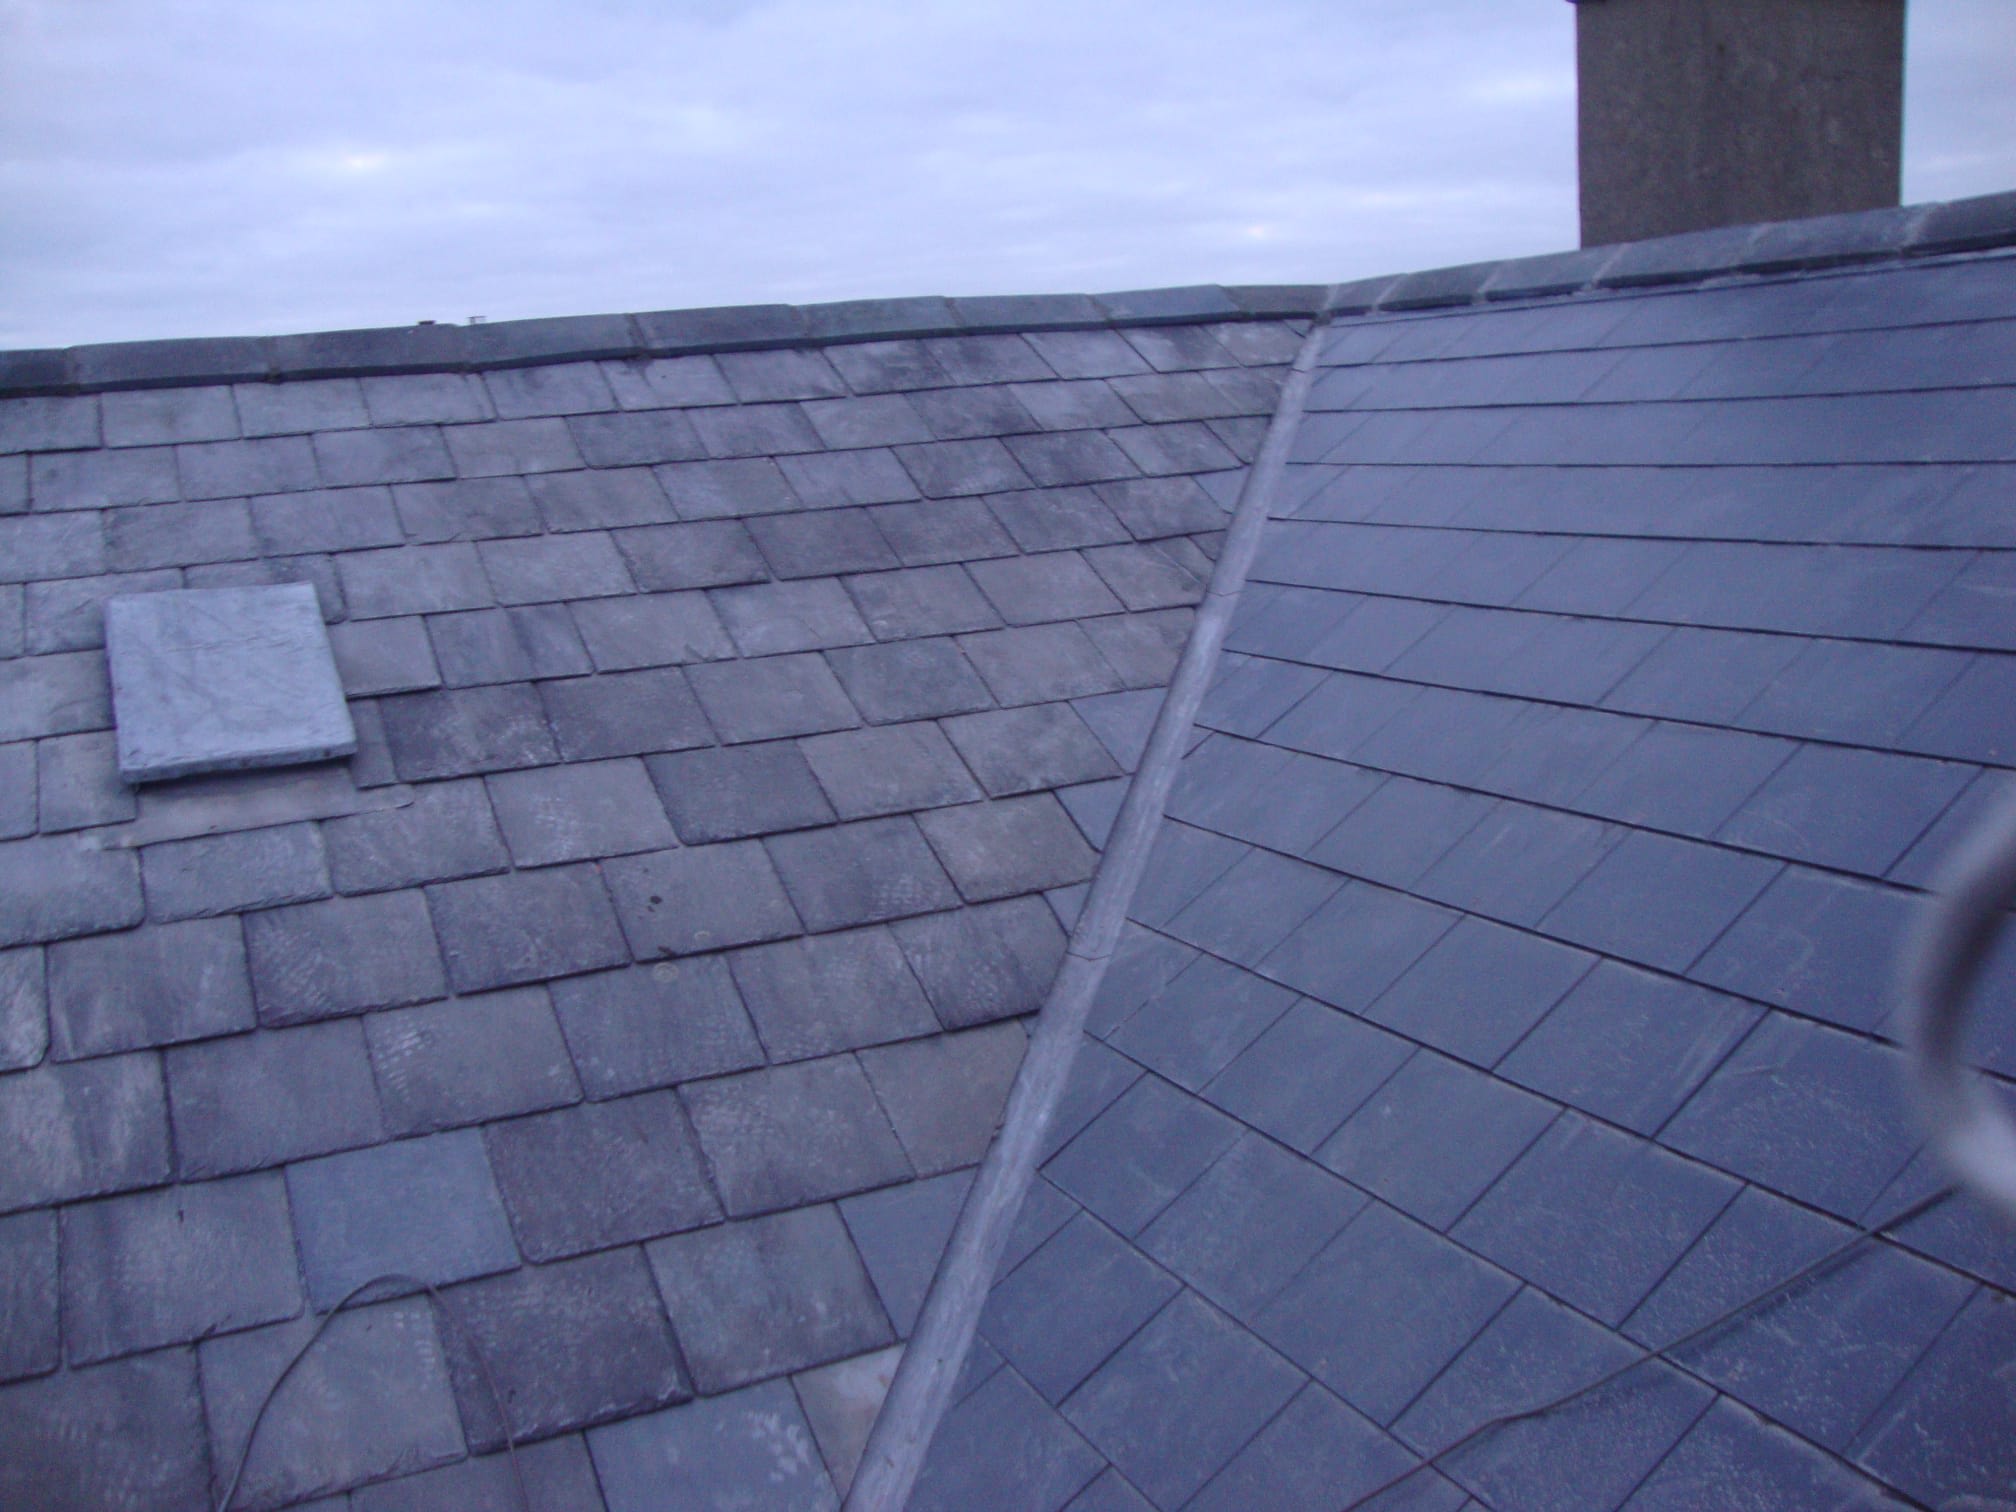 Images Nicola Roofing Services